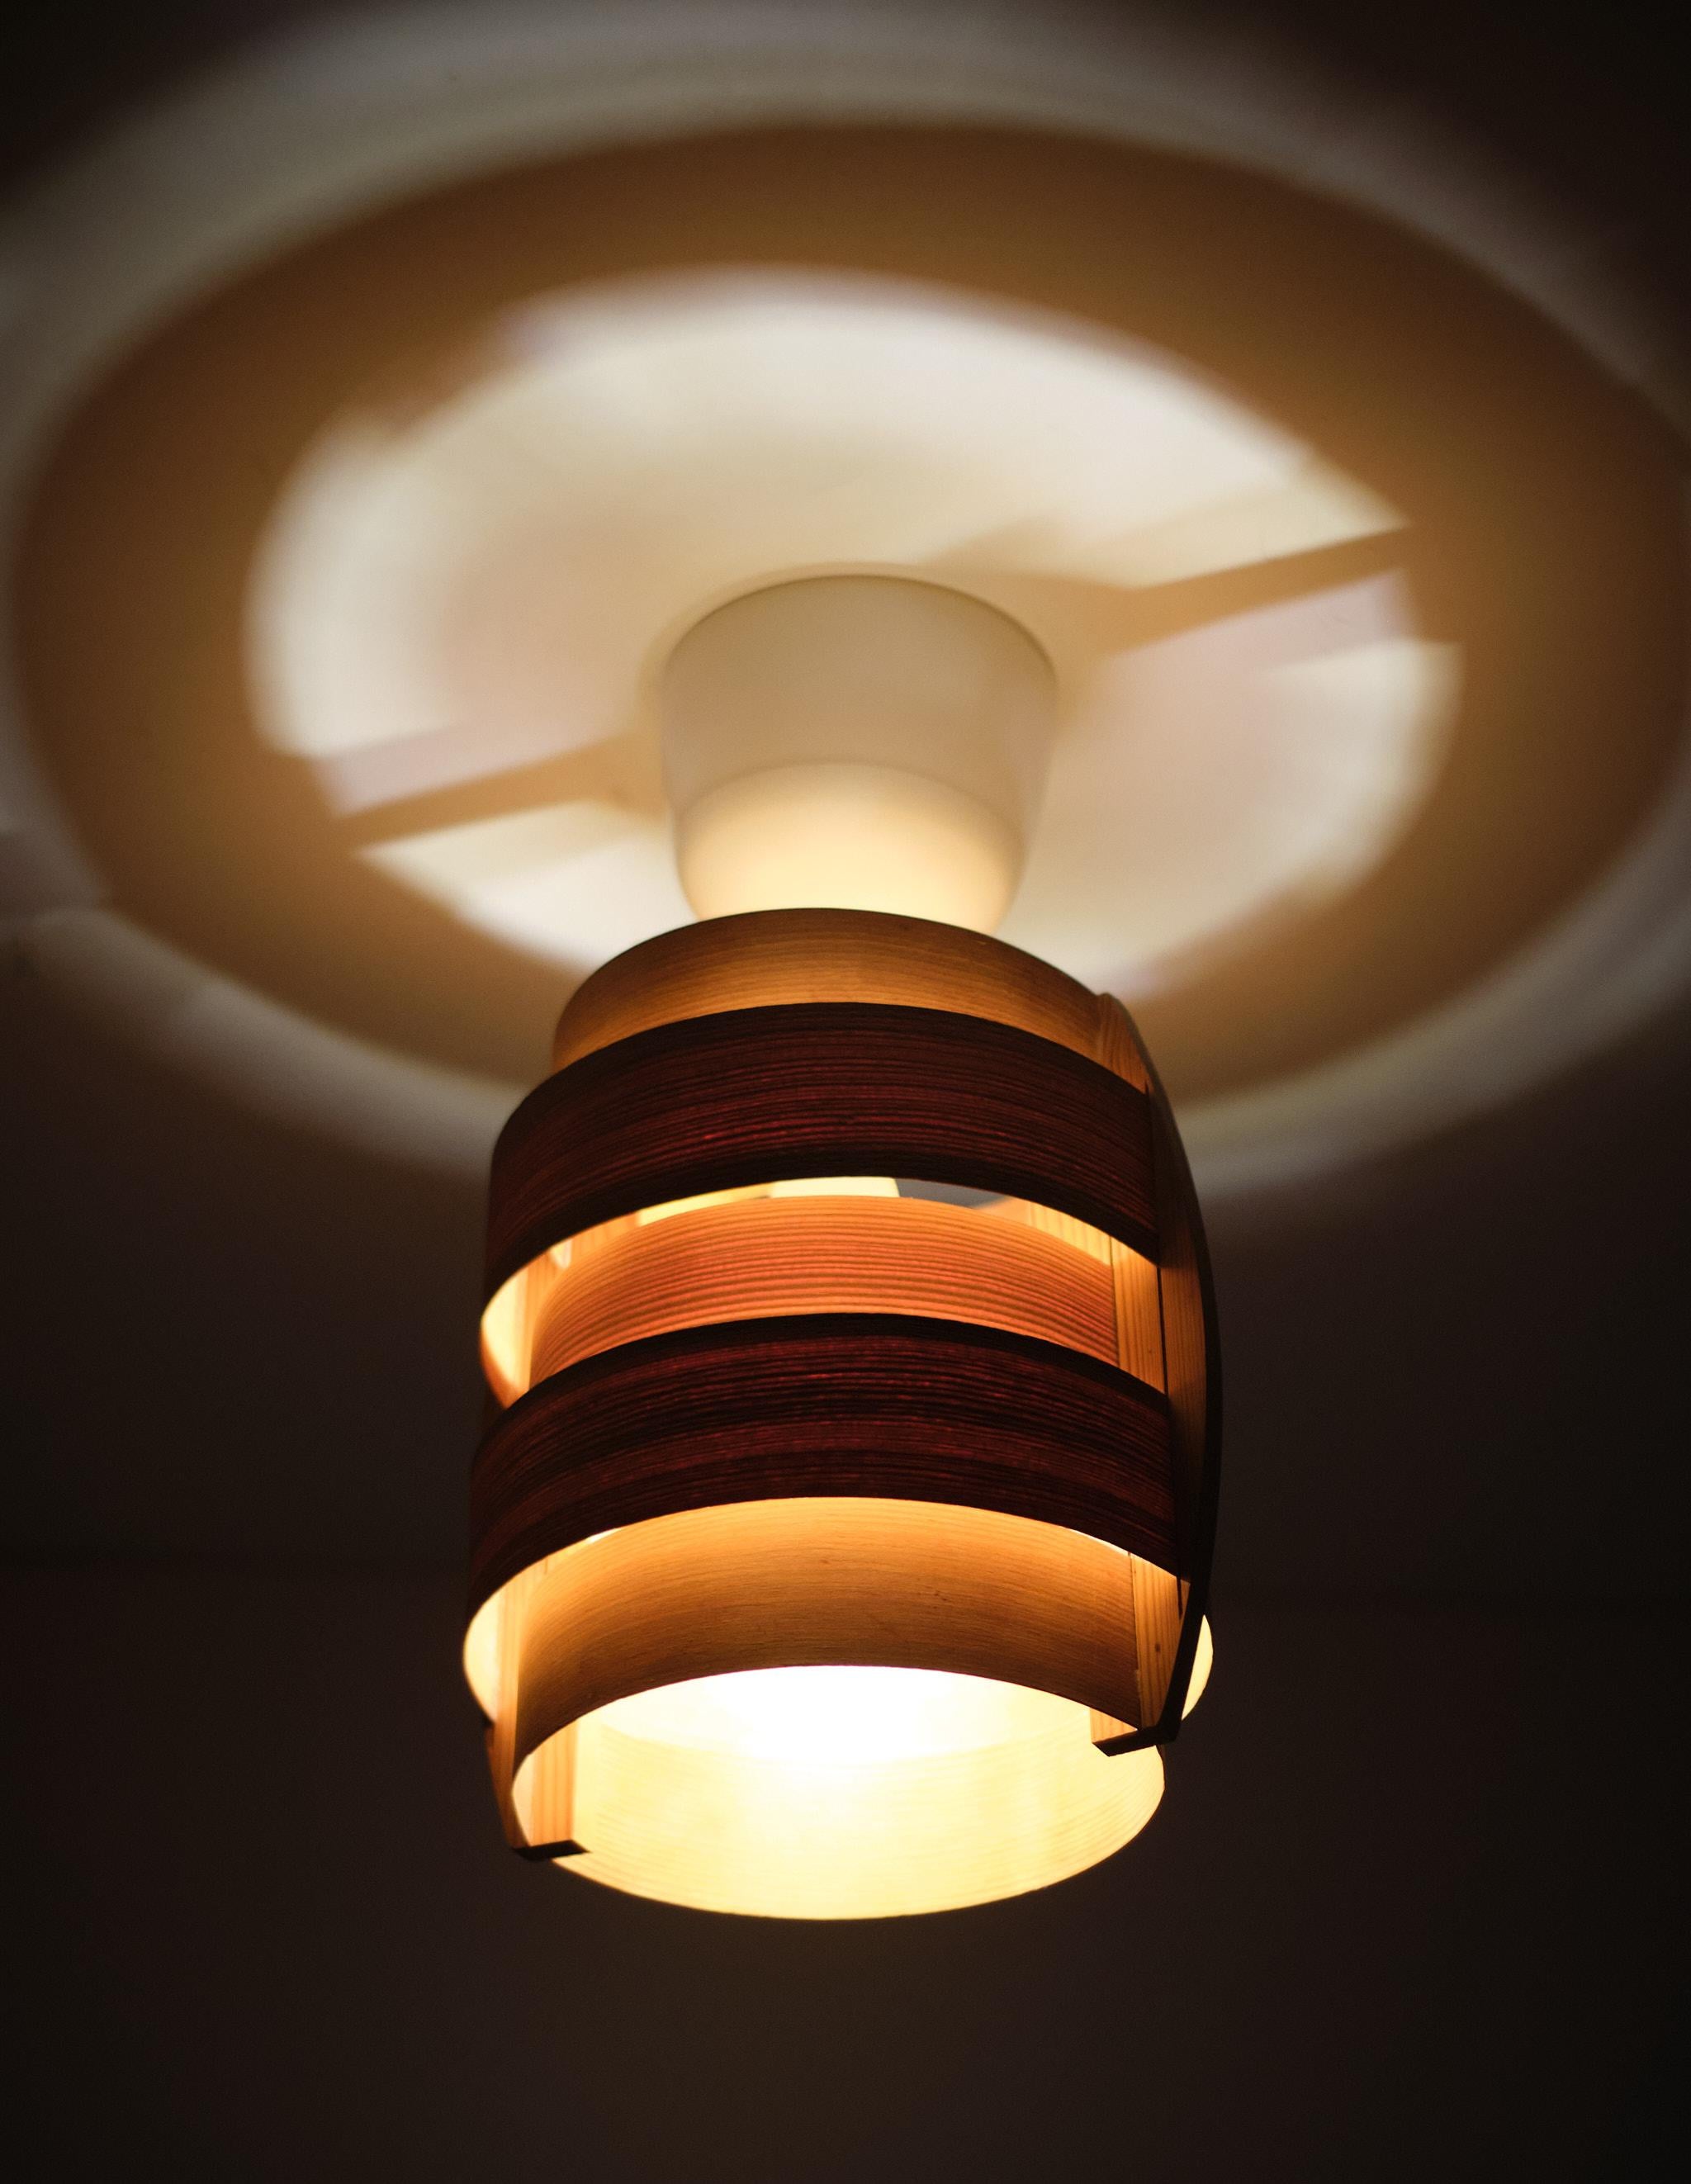 Vintage design hanging lamp. Designed in the mid-sixties by the Swedish designer Hans Agne Jakobsson. The lamp is made up of rings of plywood and has a wooden frame. The condition is good considering the age, no damage, see the detail photos.